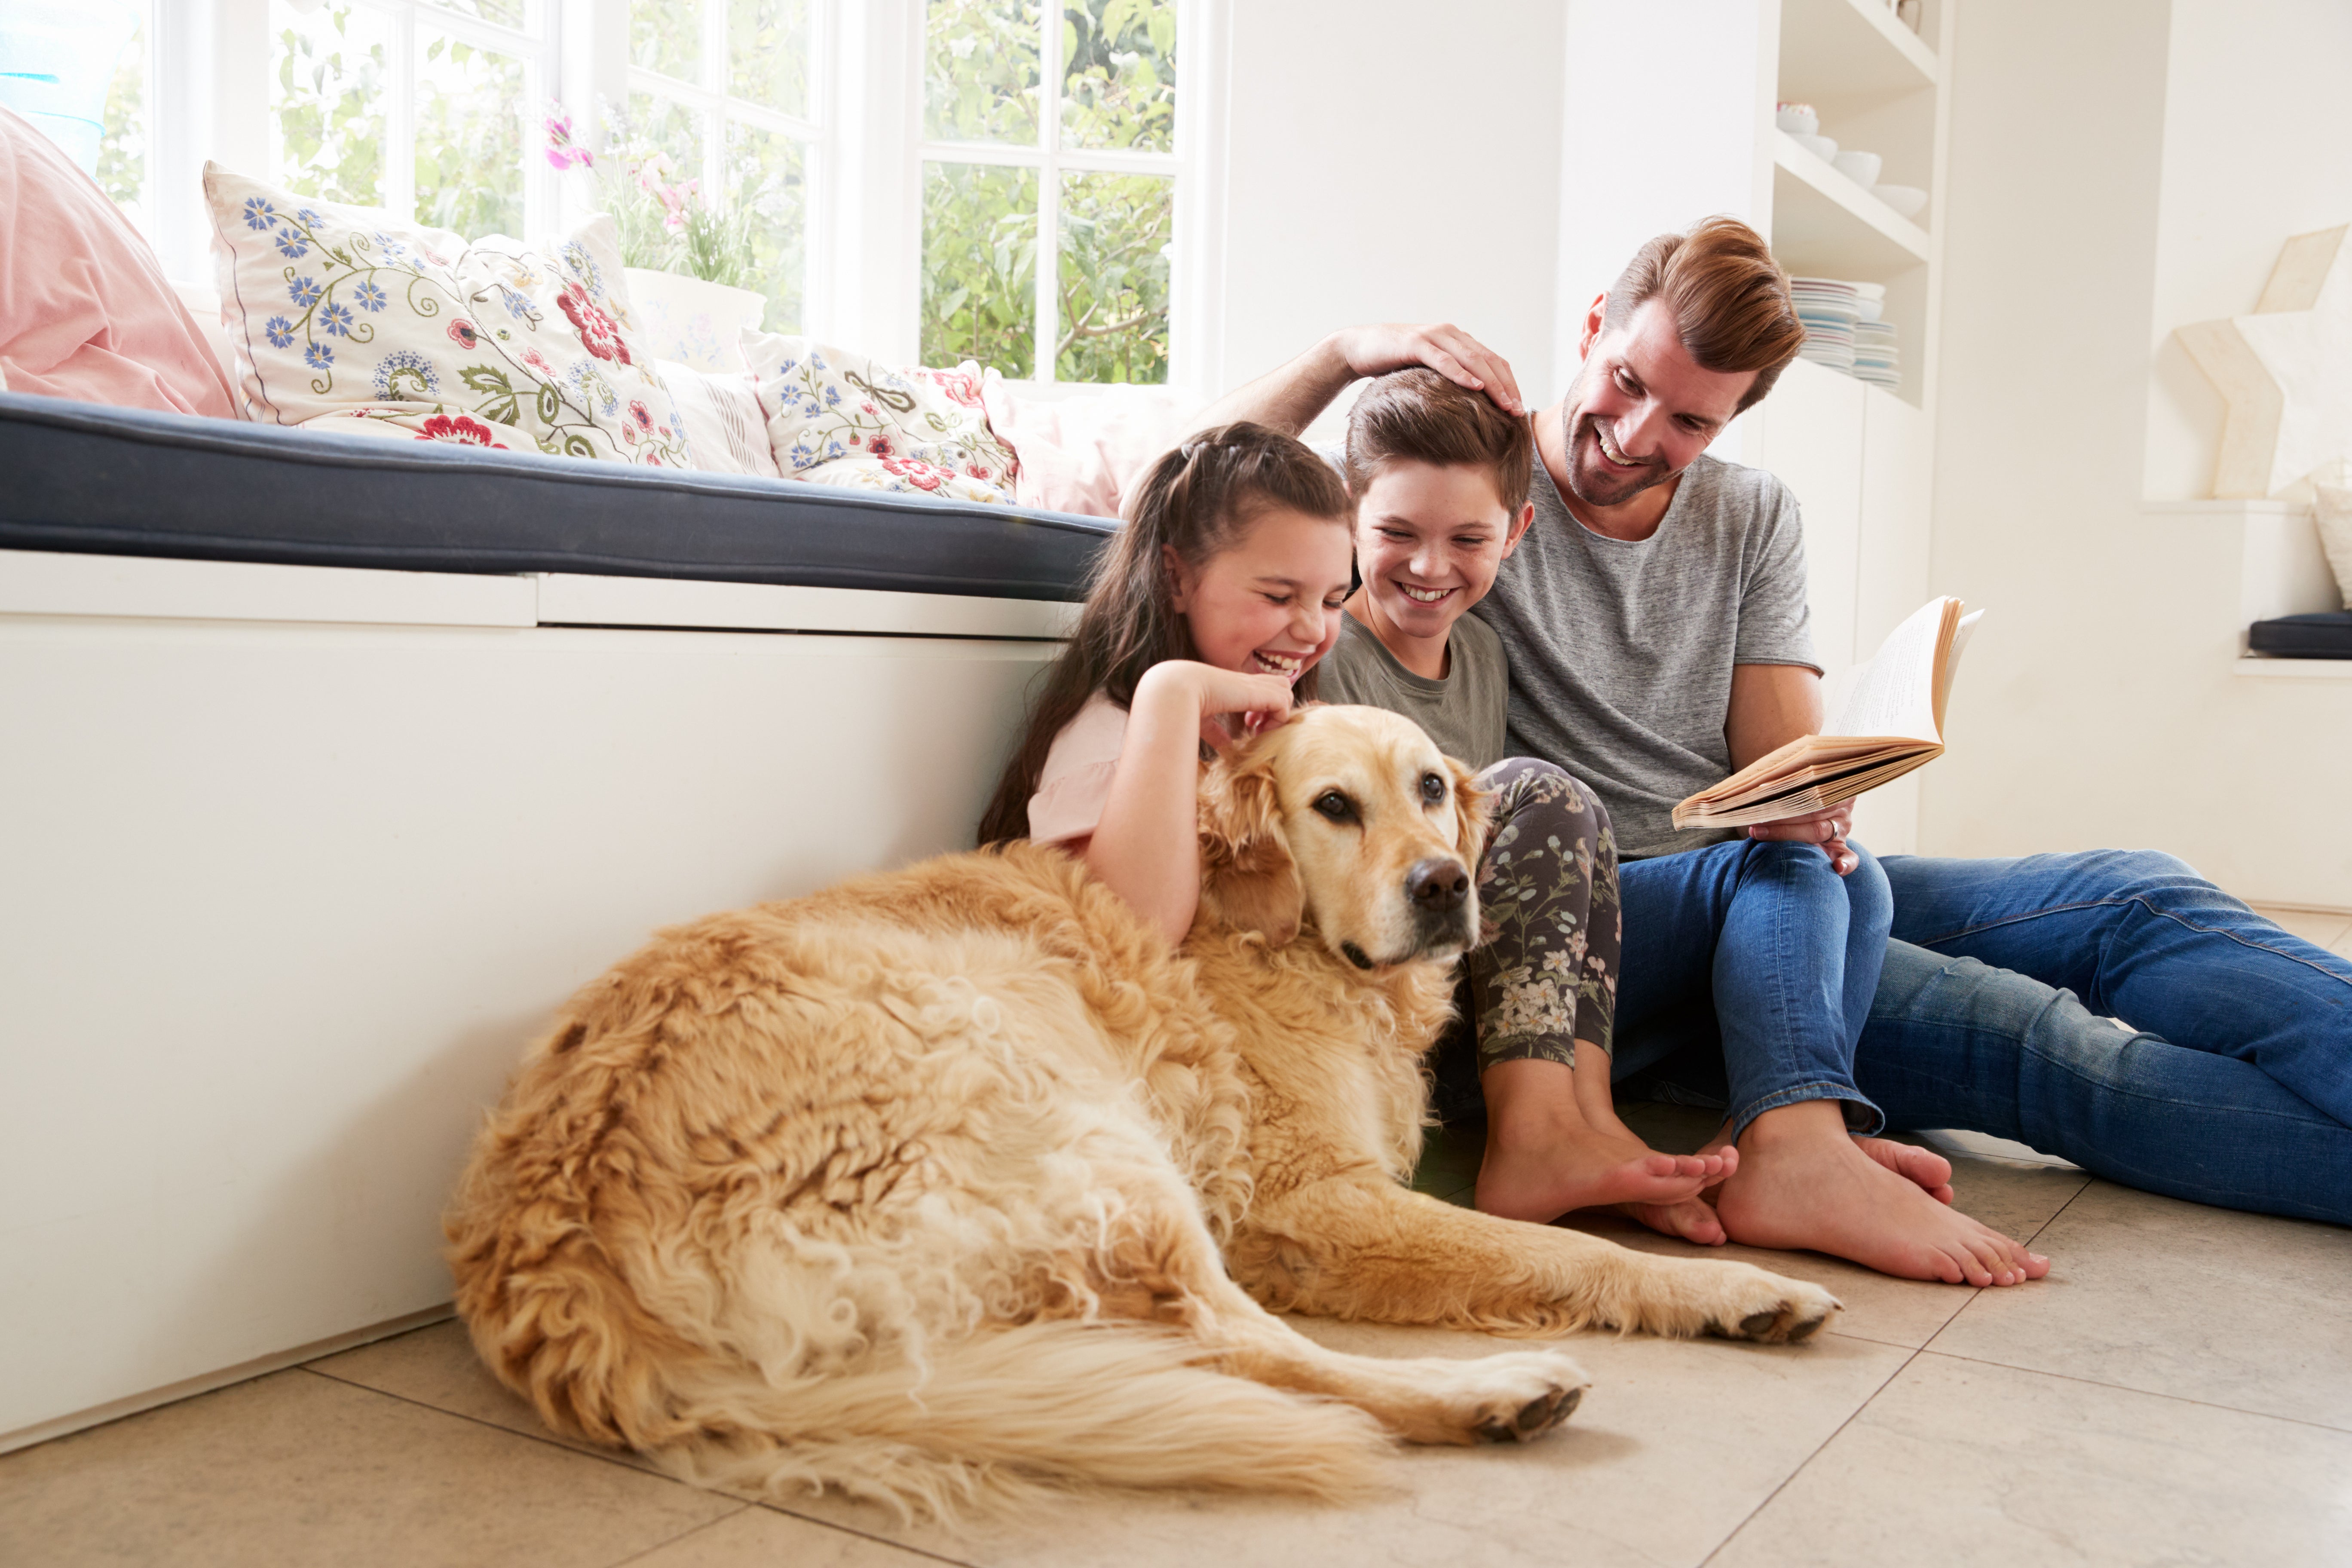 Older dog relaxes with happy family